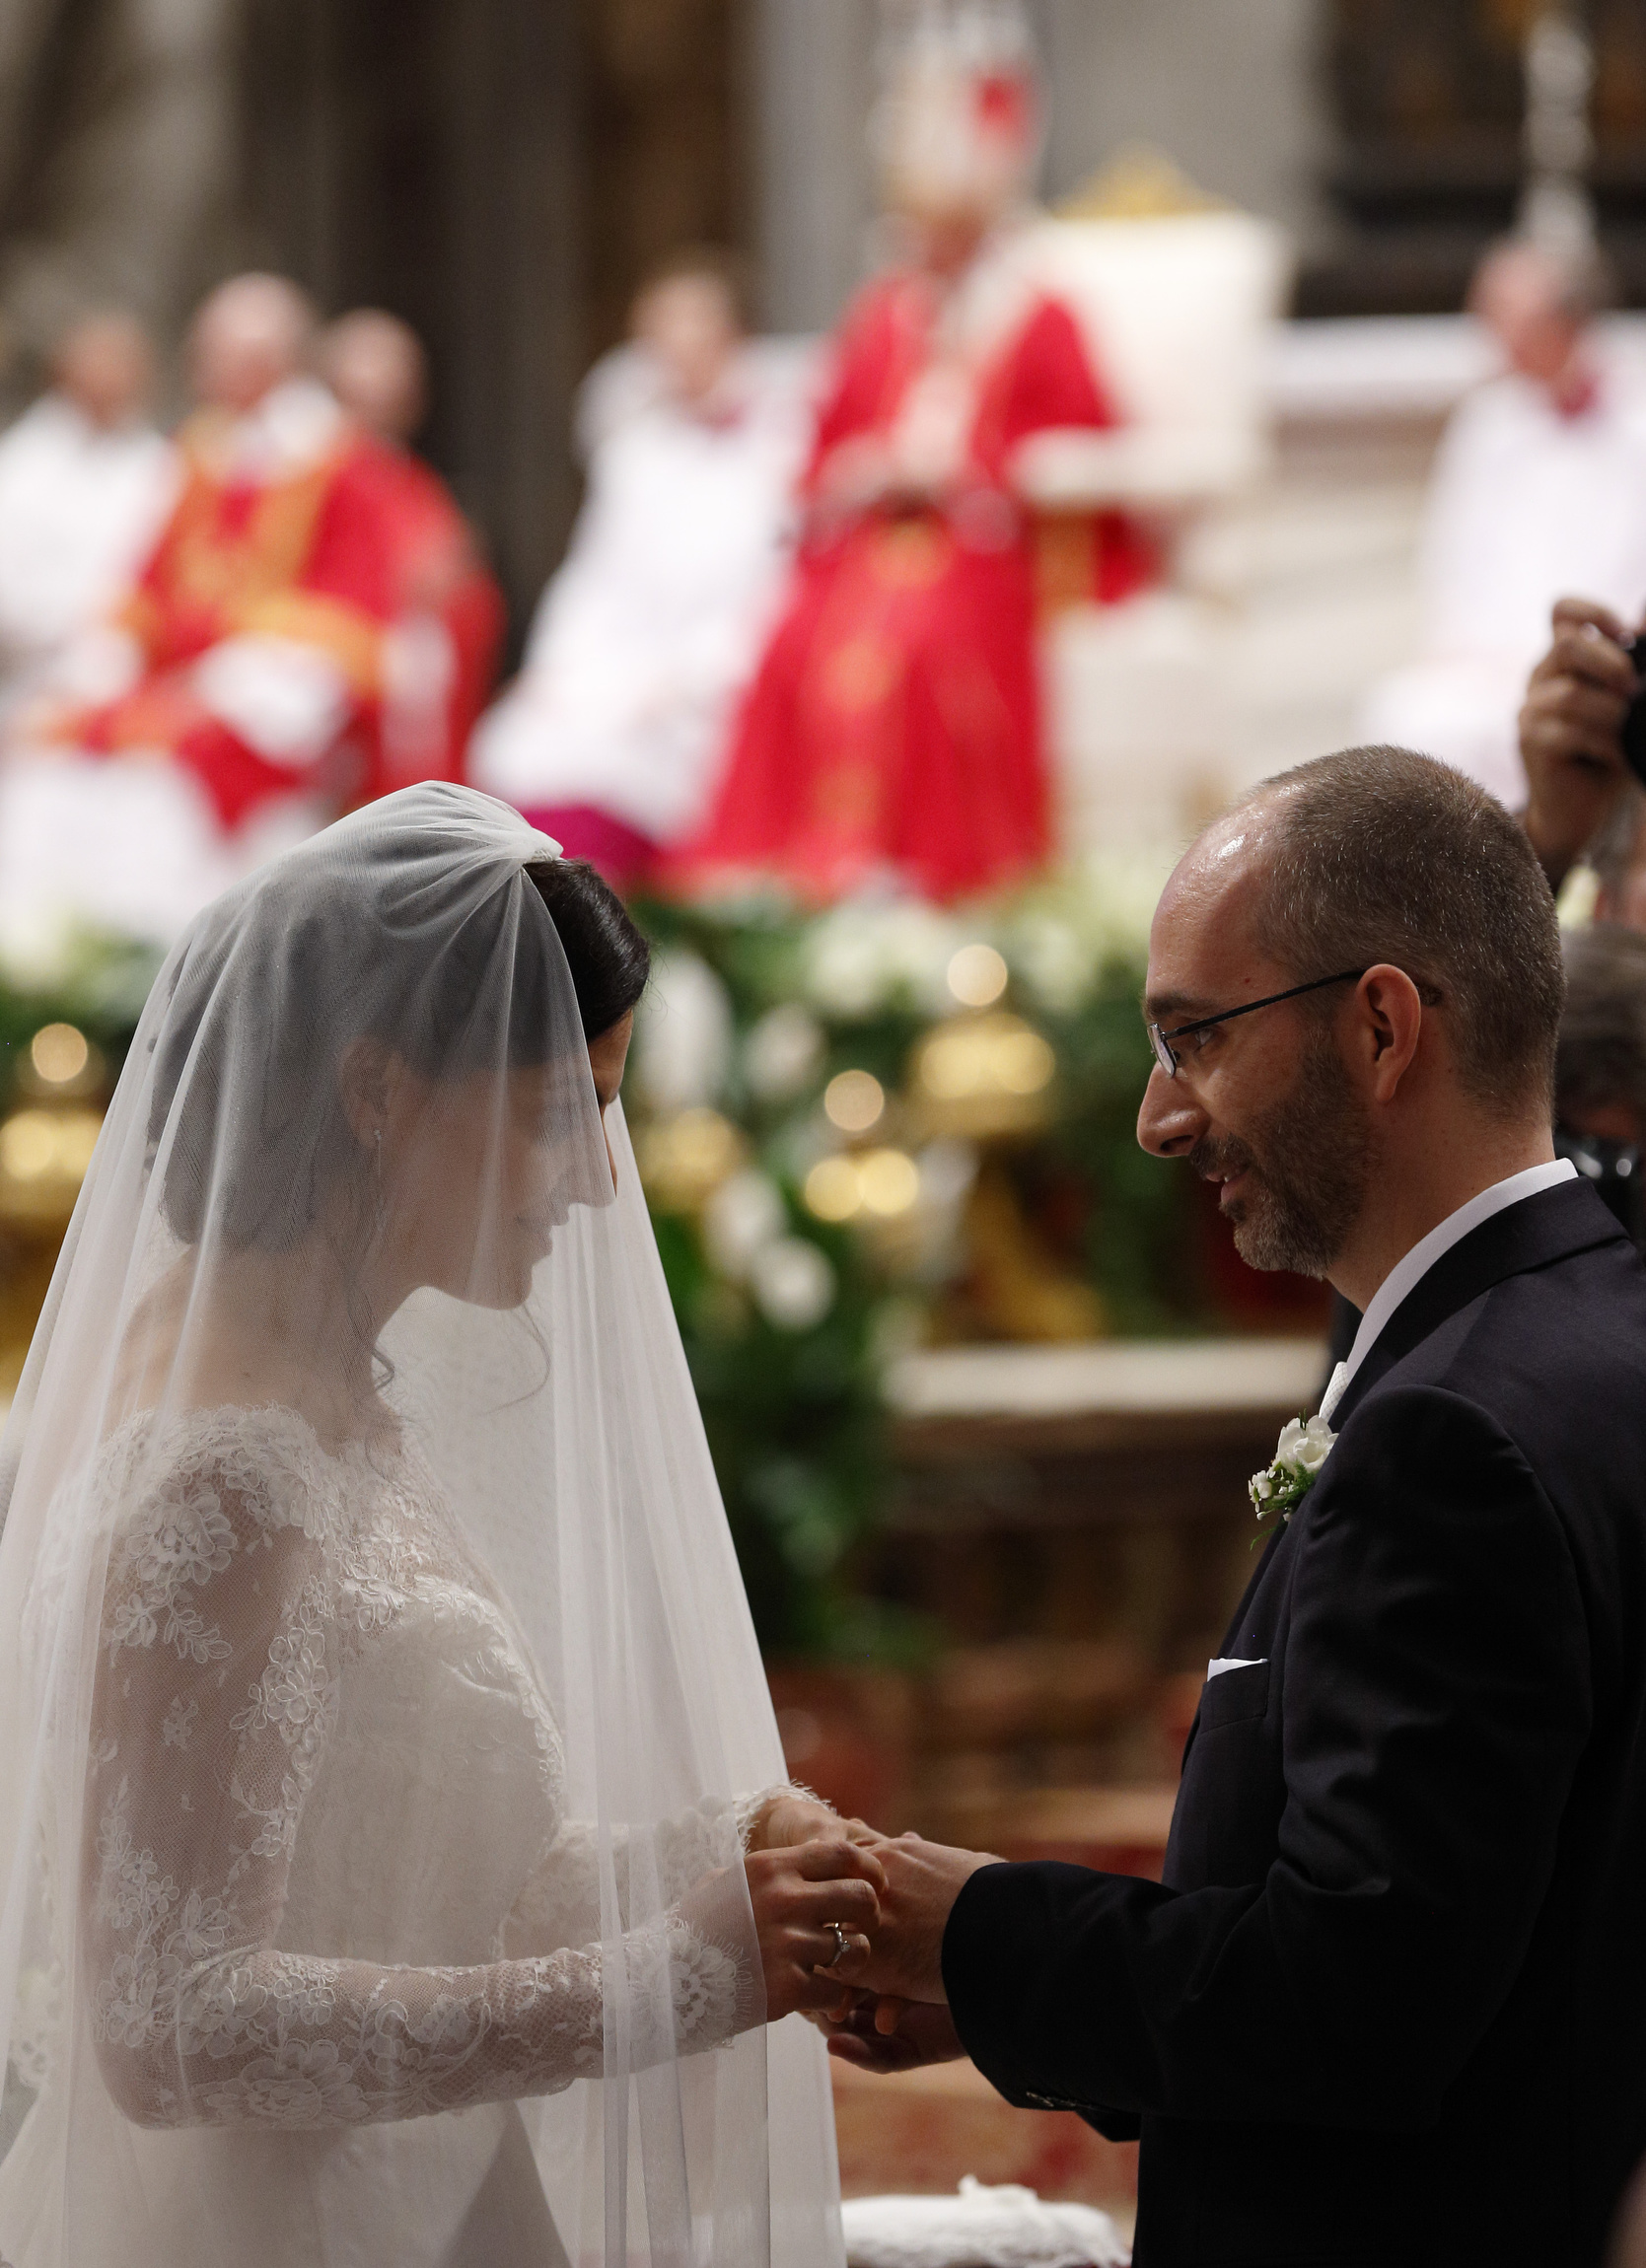 Immodest proposal: Withdrawal of Church from Civil Marriage Business ...